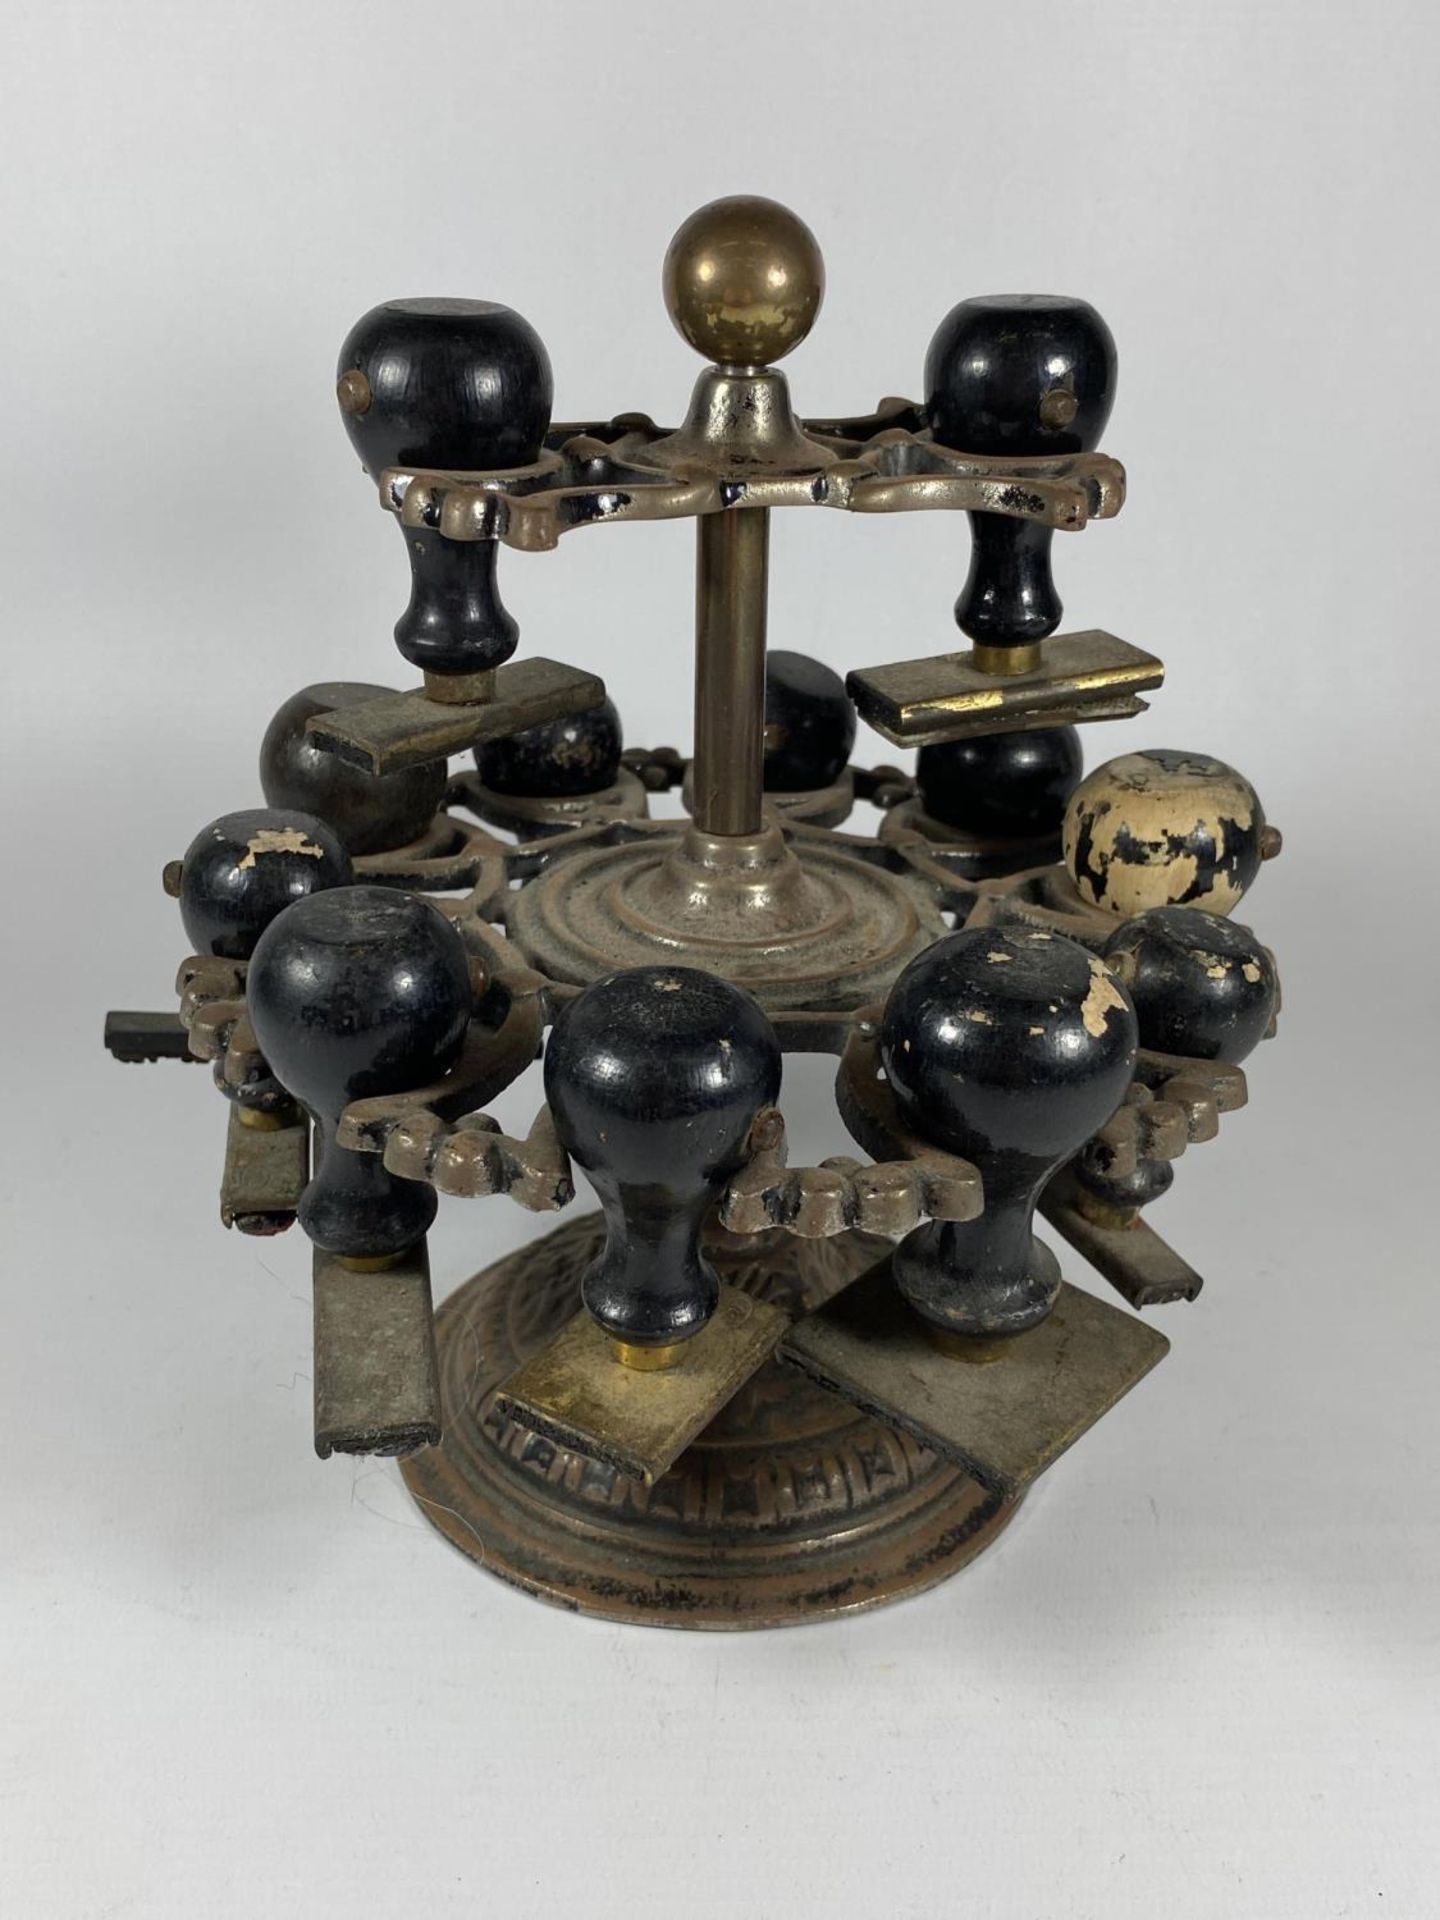 AN UNUSUAL 19TH CENTURY BRASS TWO TIER REVOLVING STAMP HOLDER WITH ORIGINAL EBONY HANDLED STAMPS,